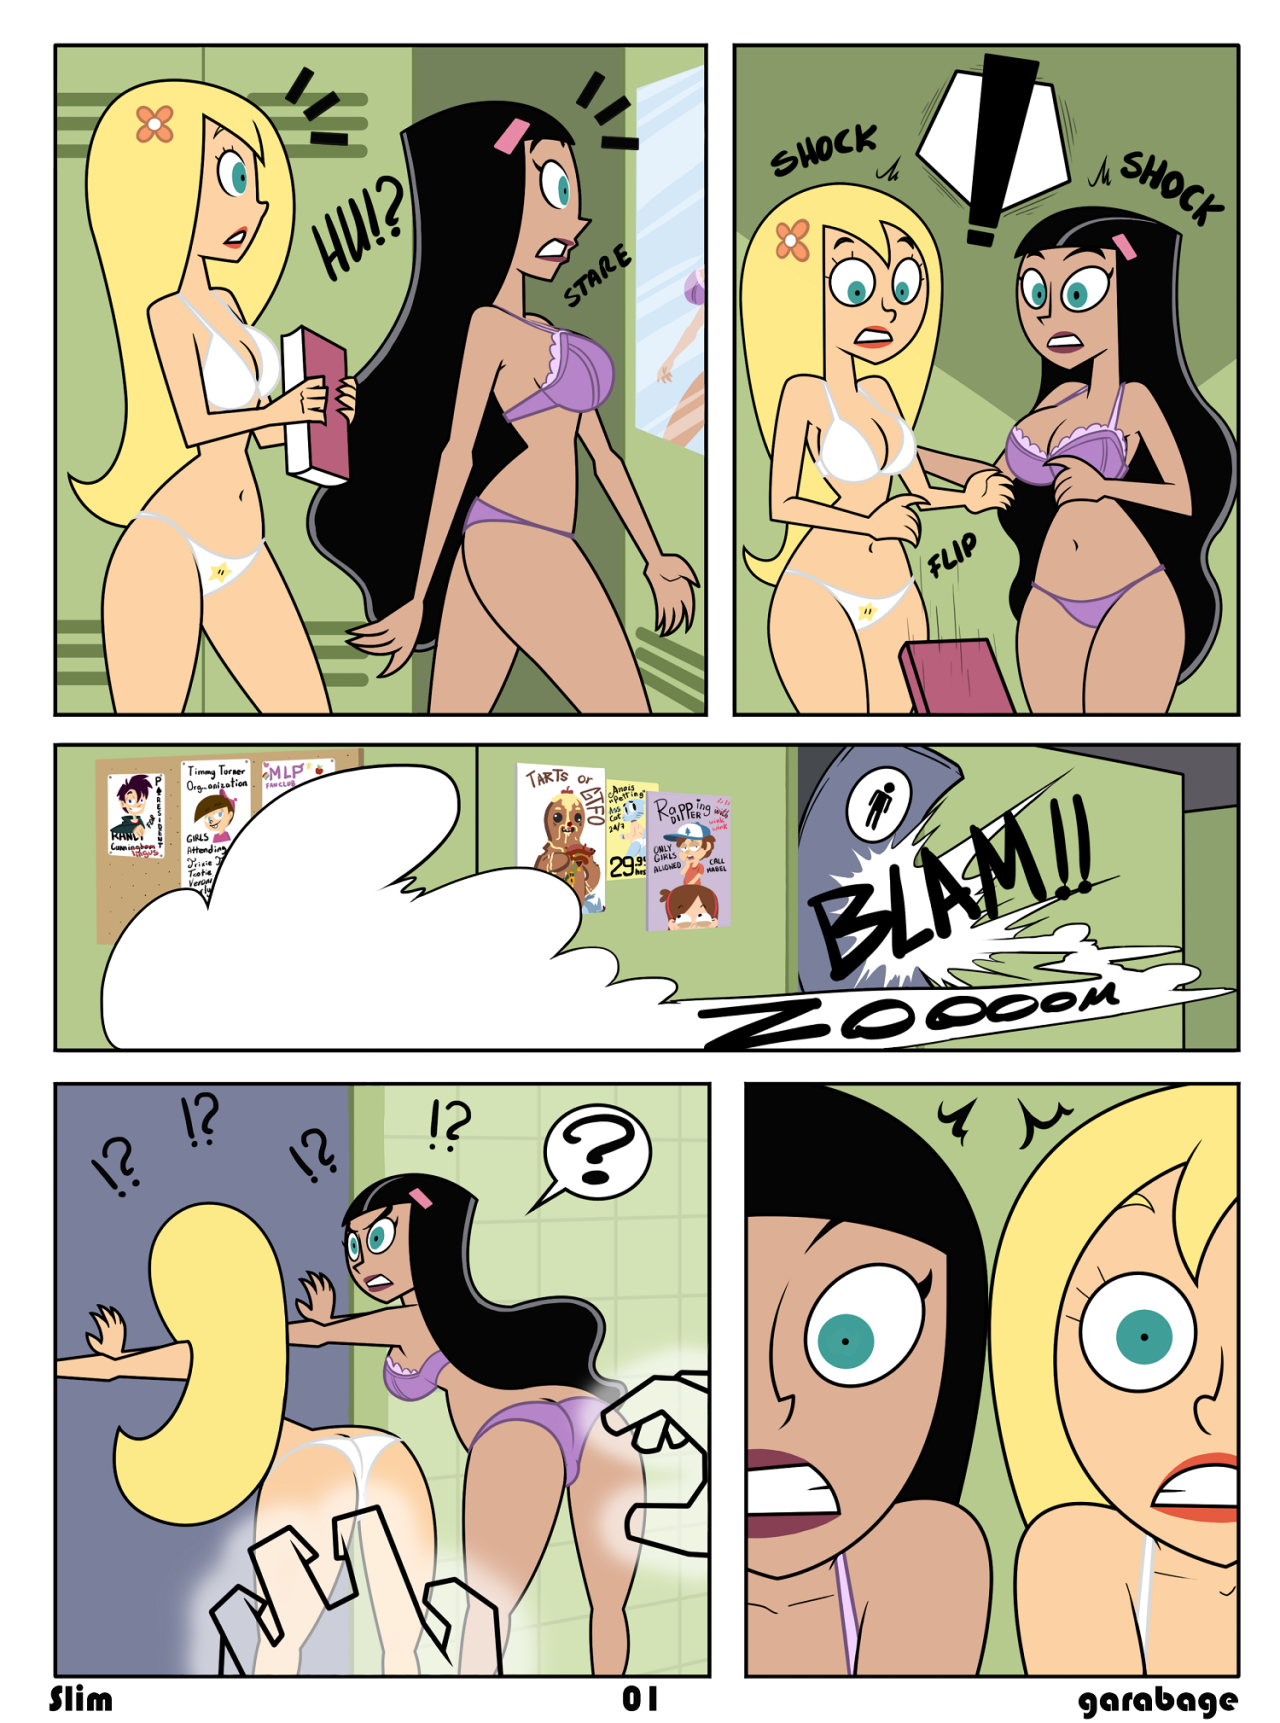 The Advantages of Being a Ghost follow-up comic Pg. 1-2  COMMISSIONED ARTWORK and